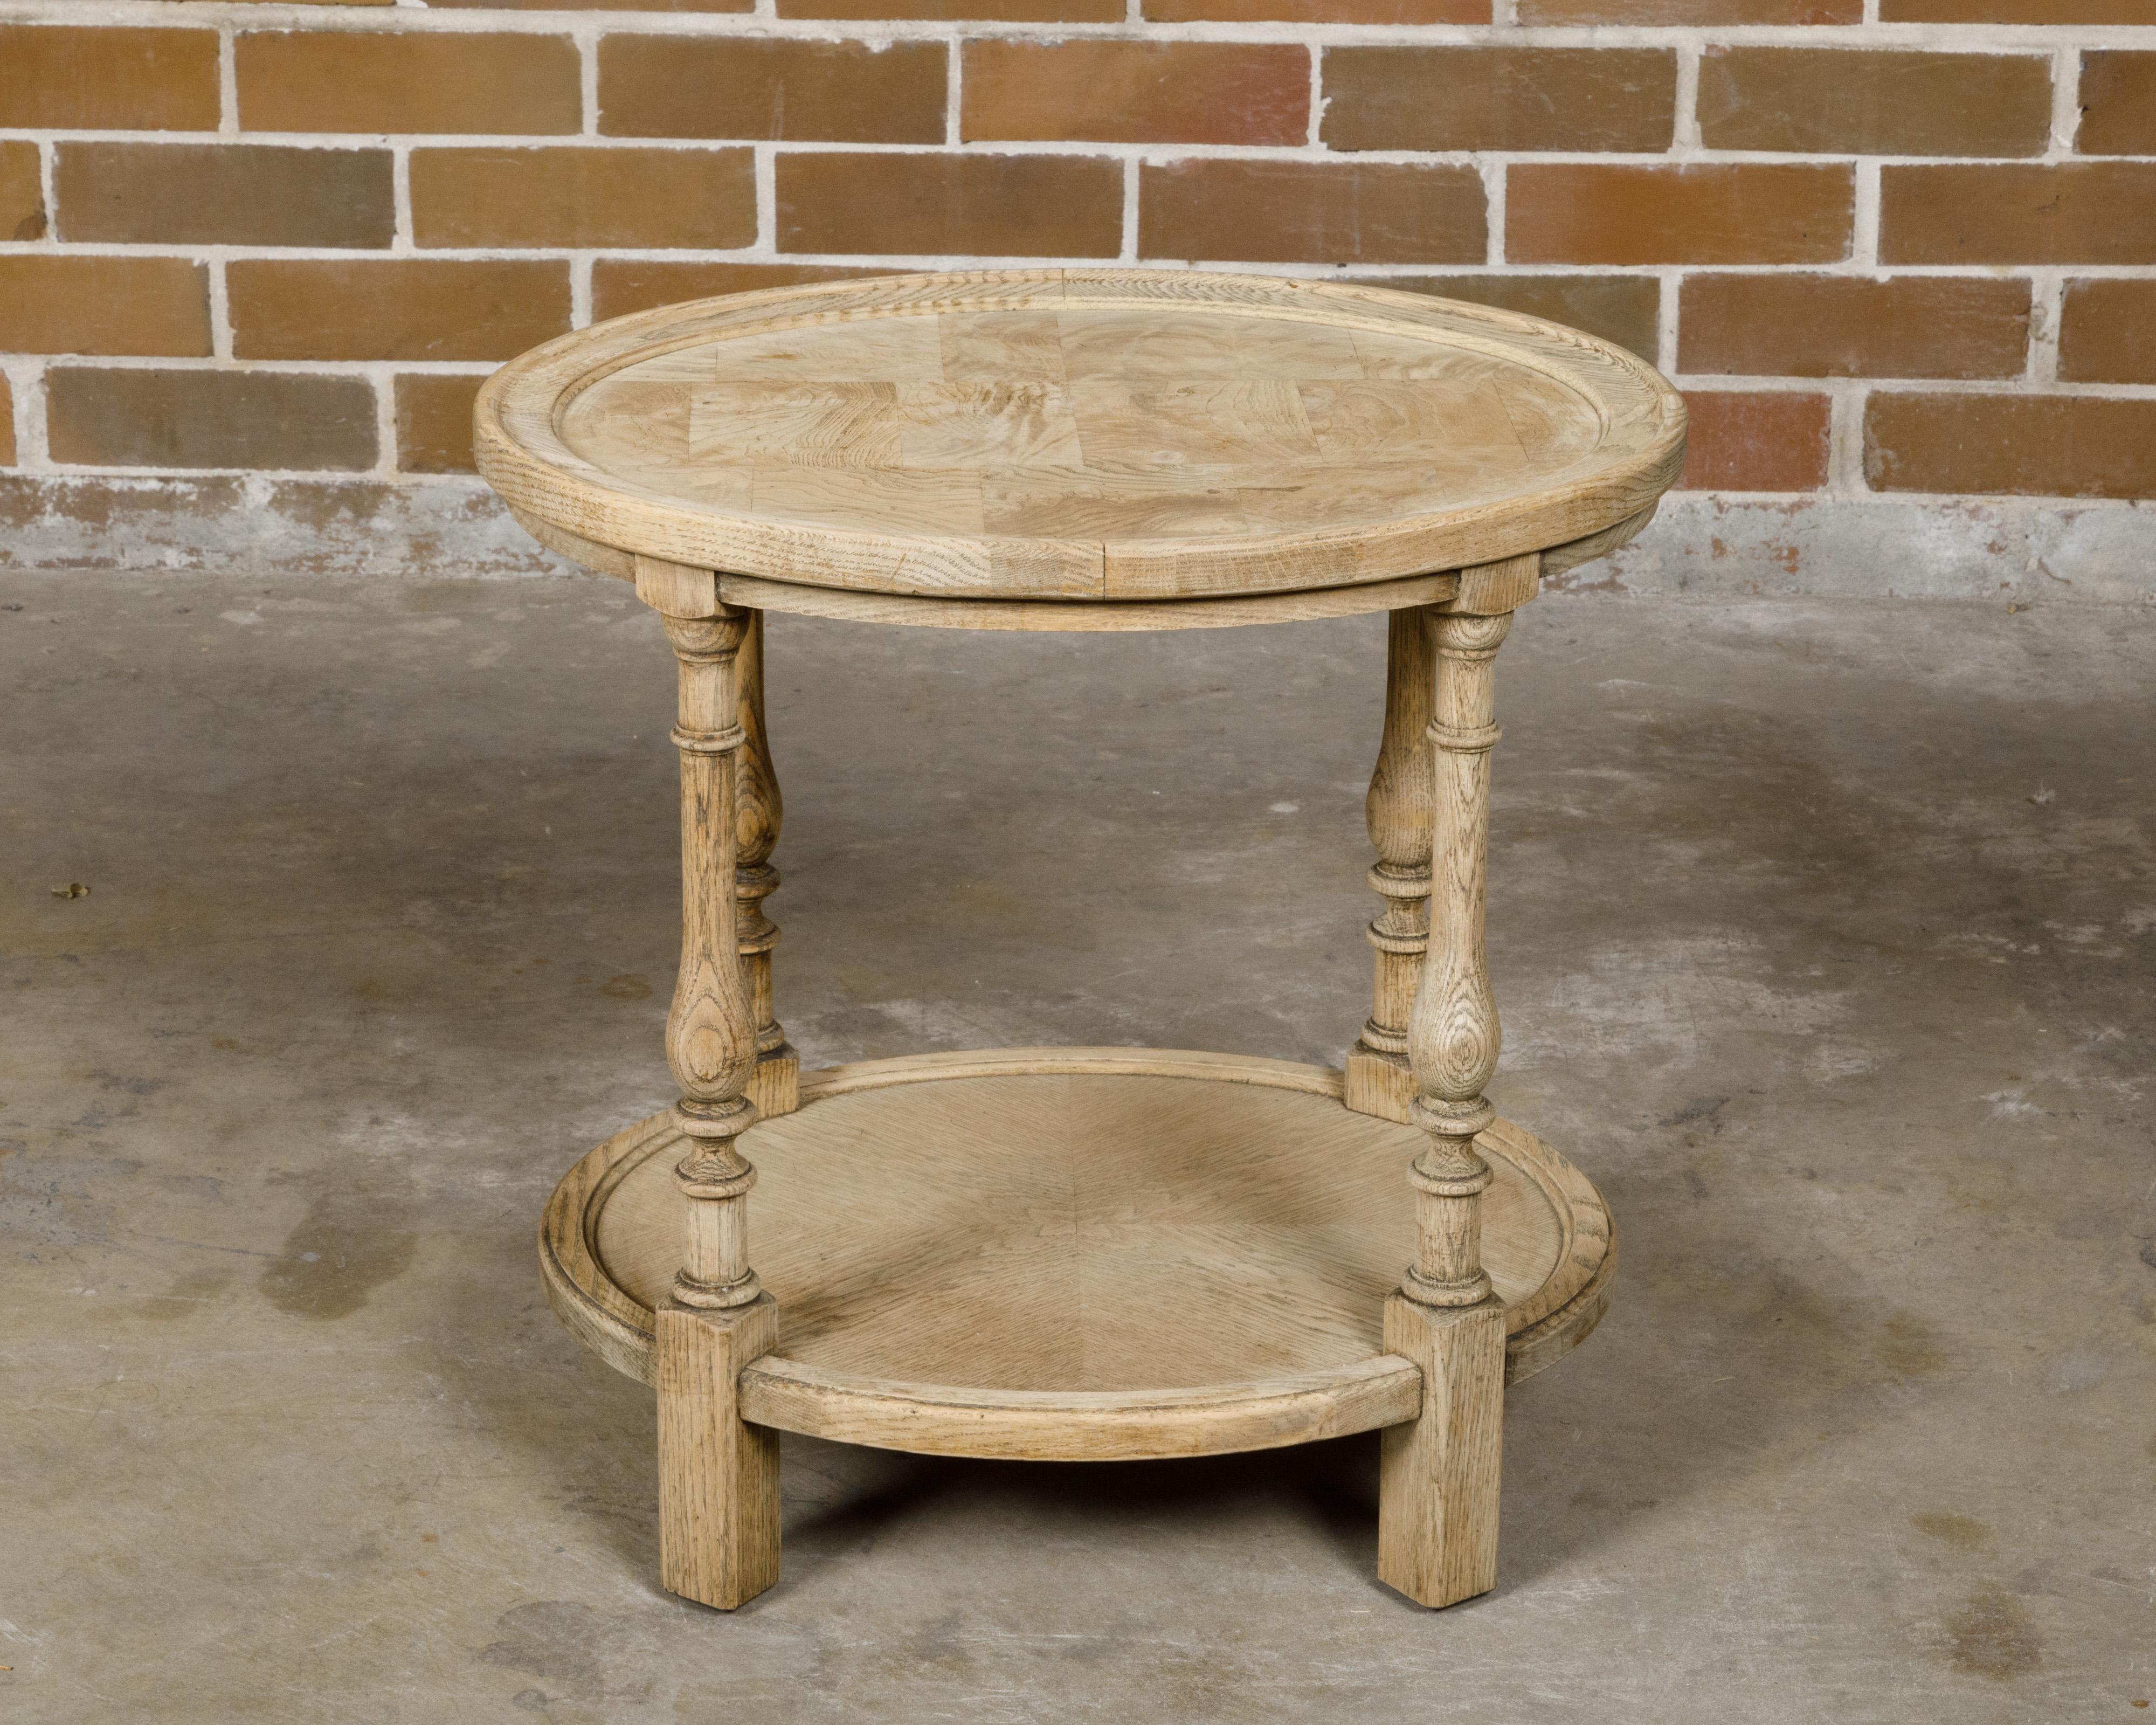 An English bleached elmwood veneered oval side table from circa 1900 with two tiers, turned baluster legs and rectangular block joints. This English side table, gracefully crafted from bleached elmwood veneer, showcases a timeless oval design